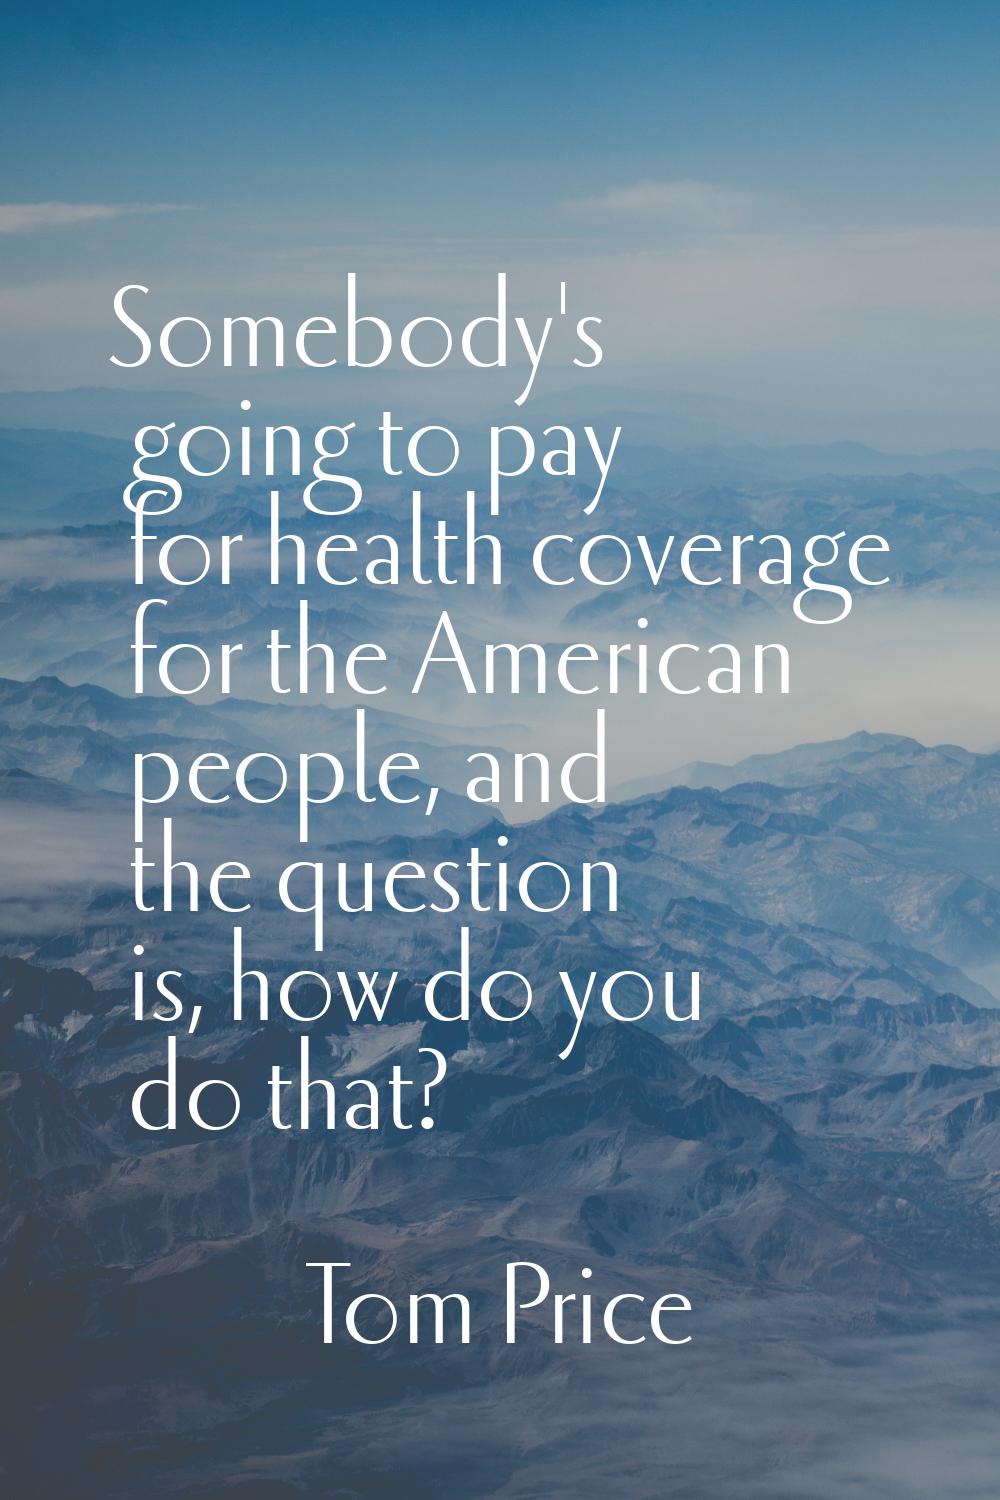 Somebody's going to pay for health coverage for the American people, and the question is, how do yo